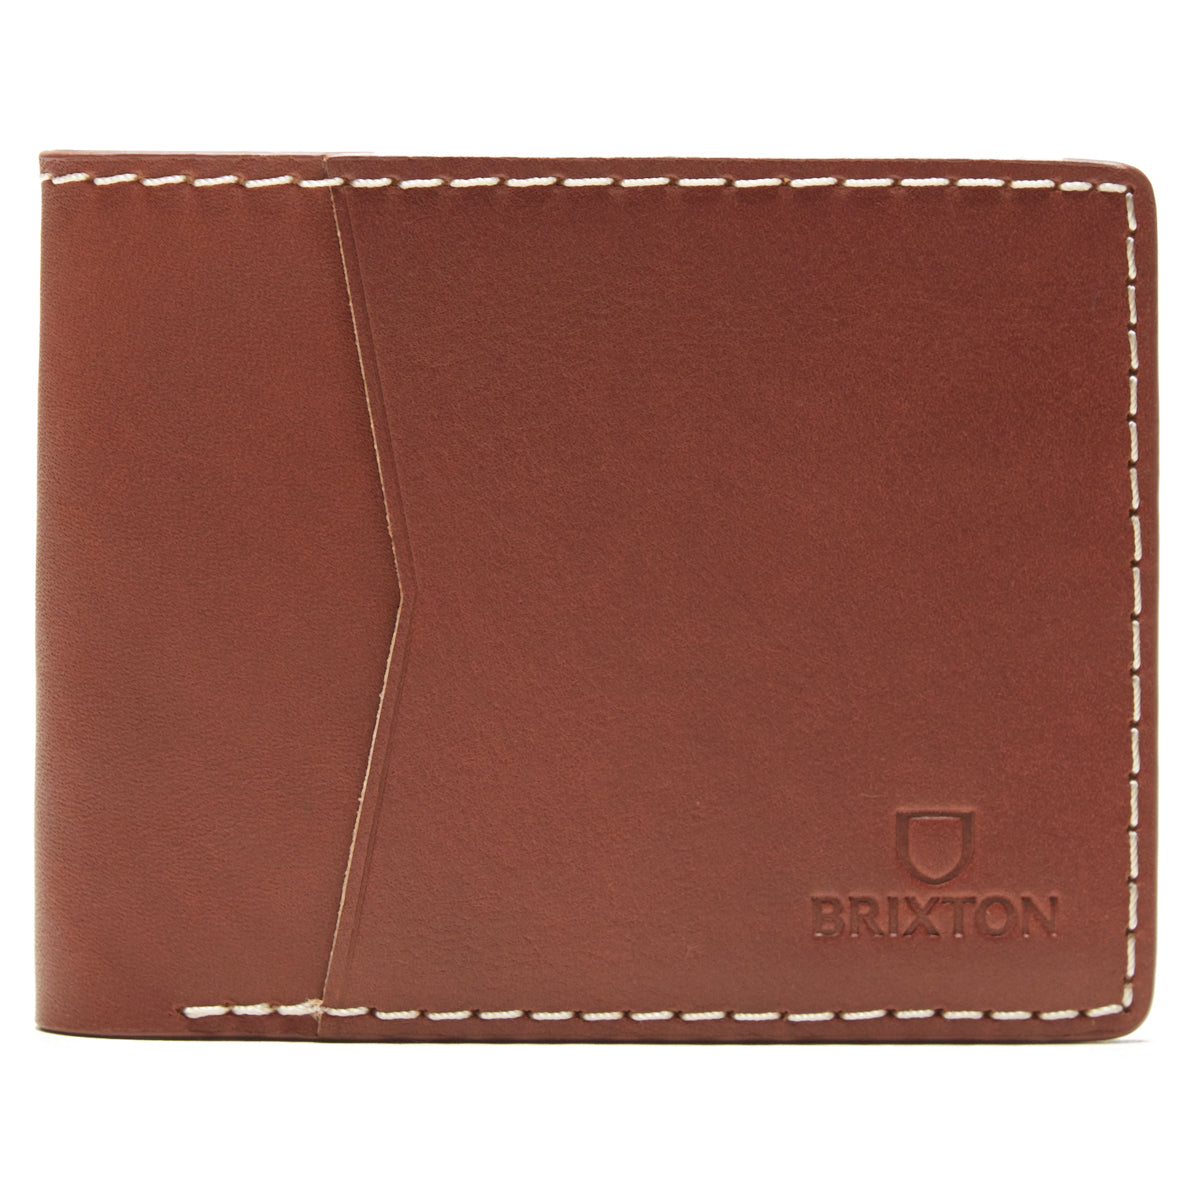 Brixton Traditional Leather Wallet - Brown image 1